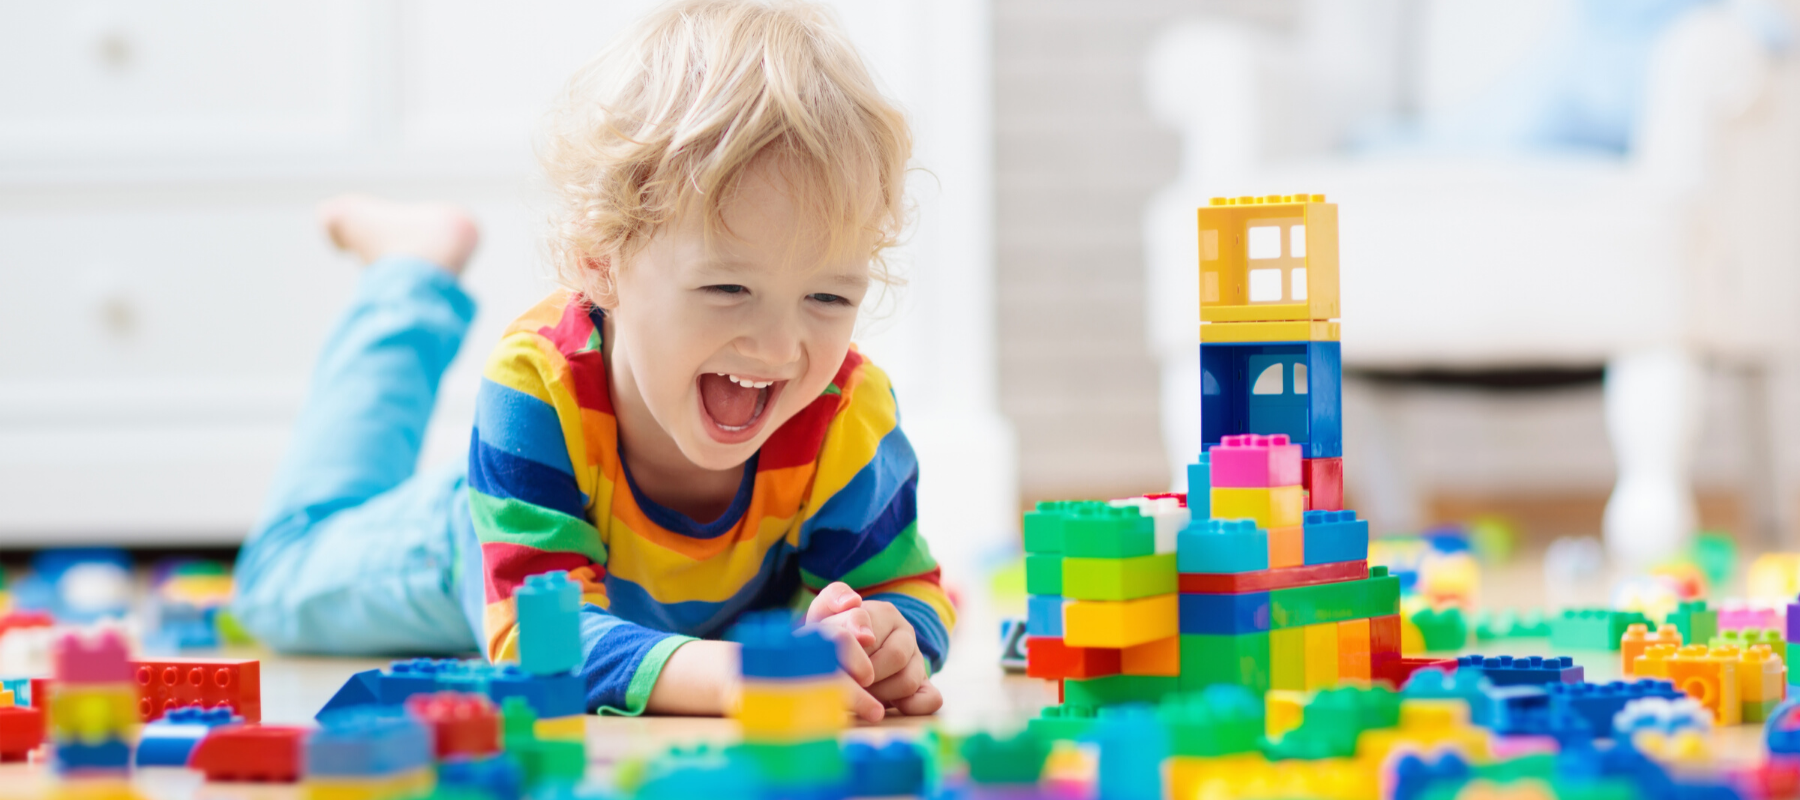 Top 10 Fun Learning Activities For Toddlers